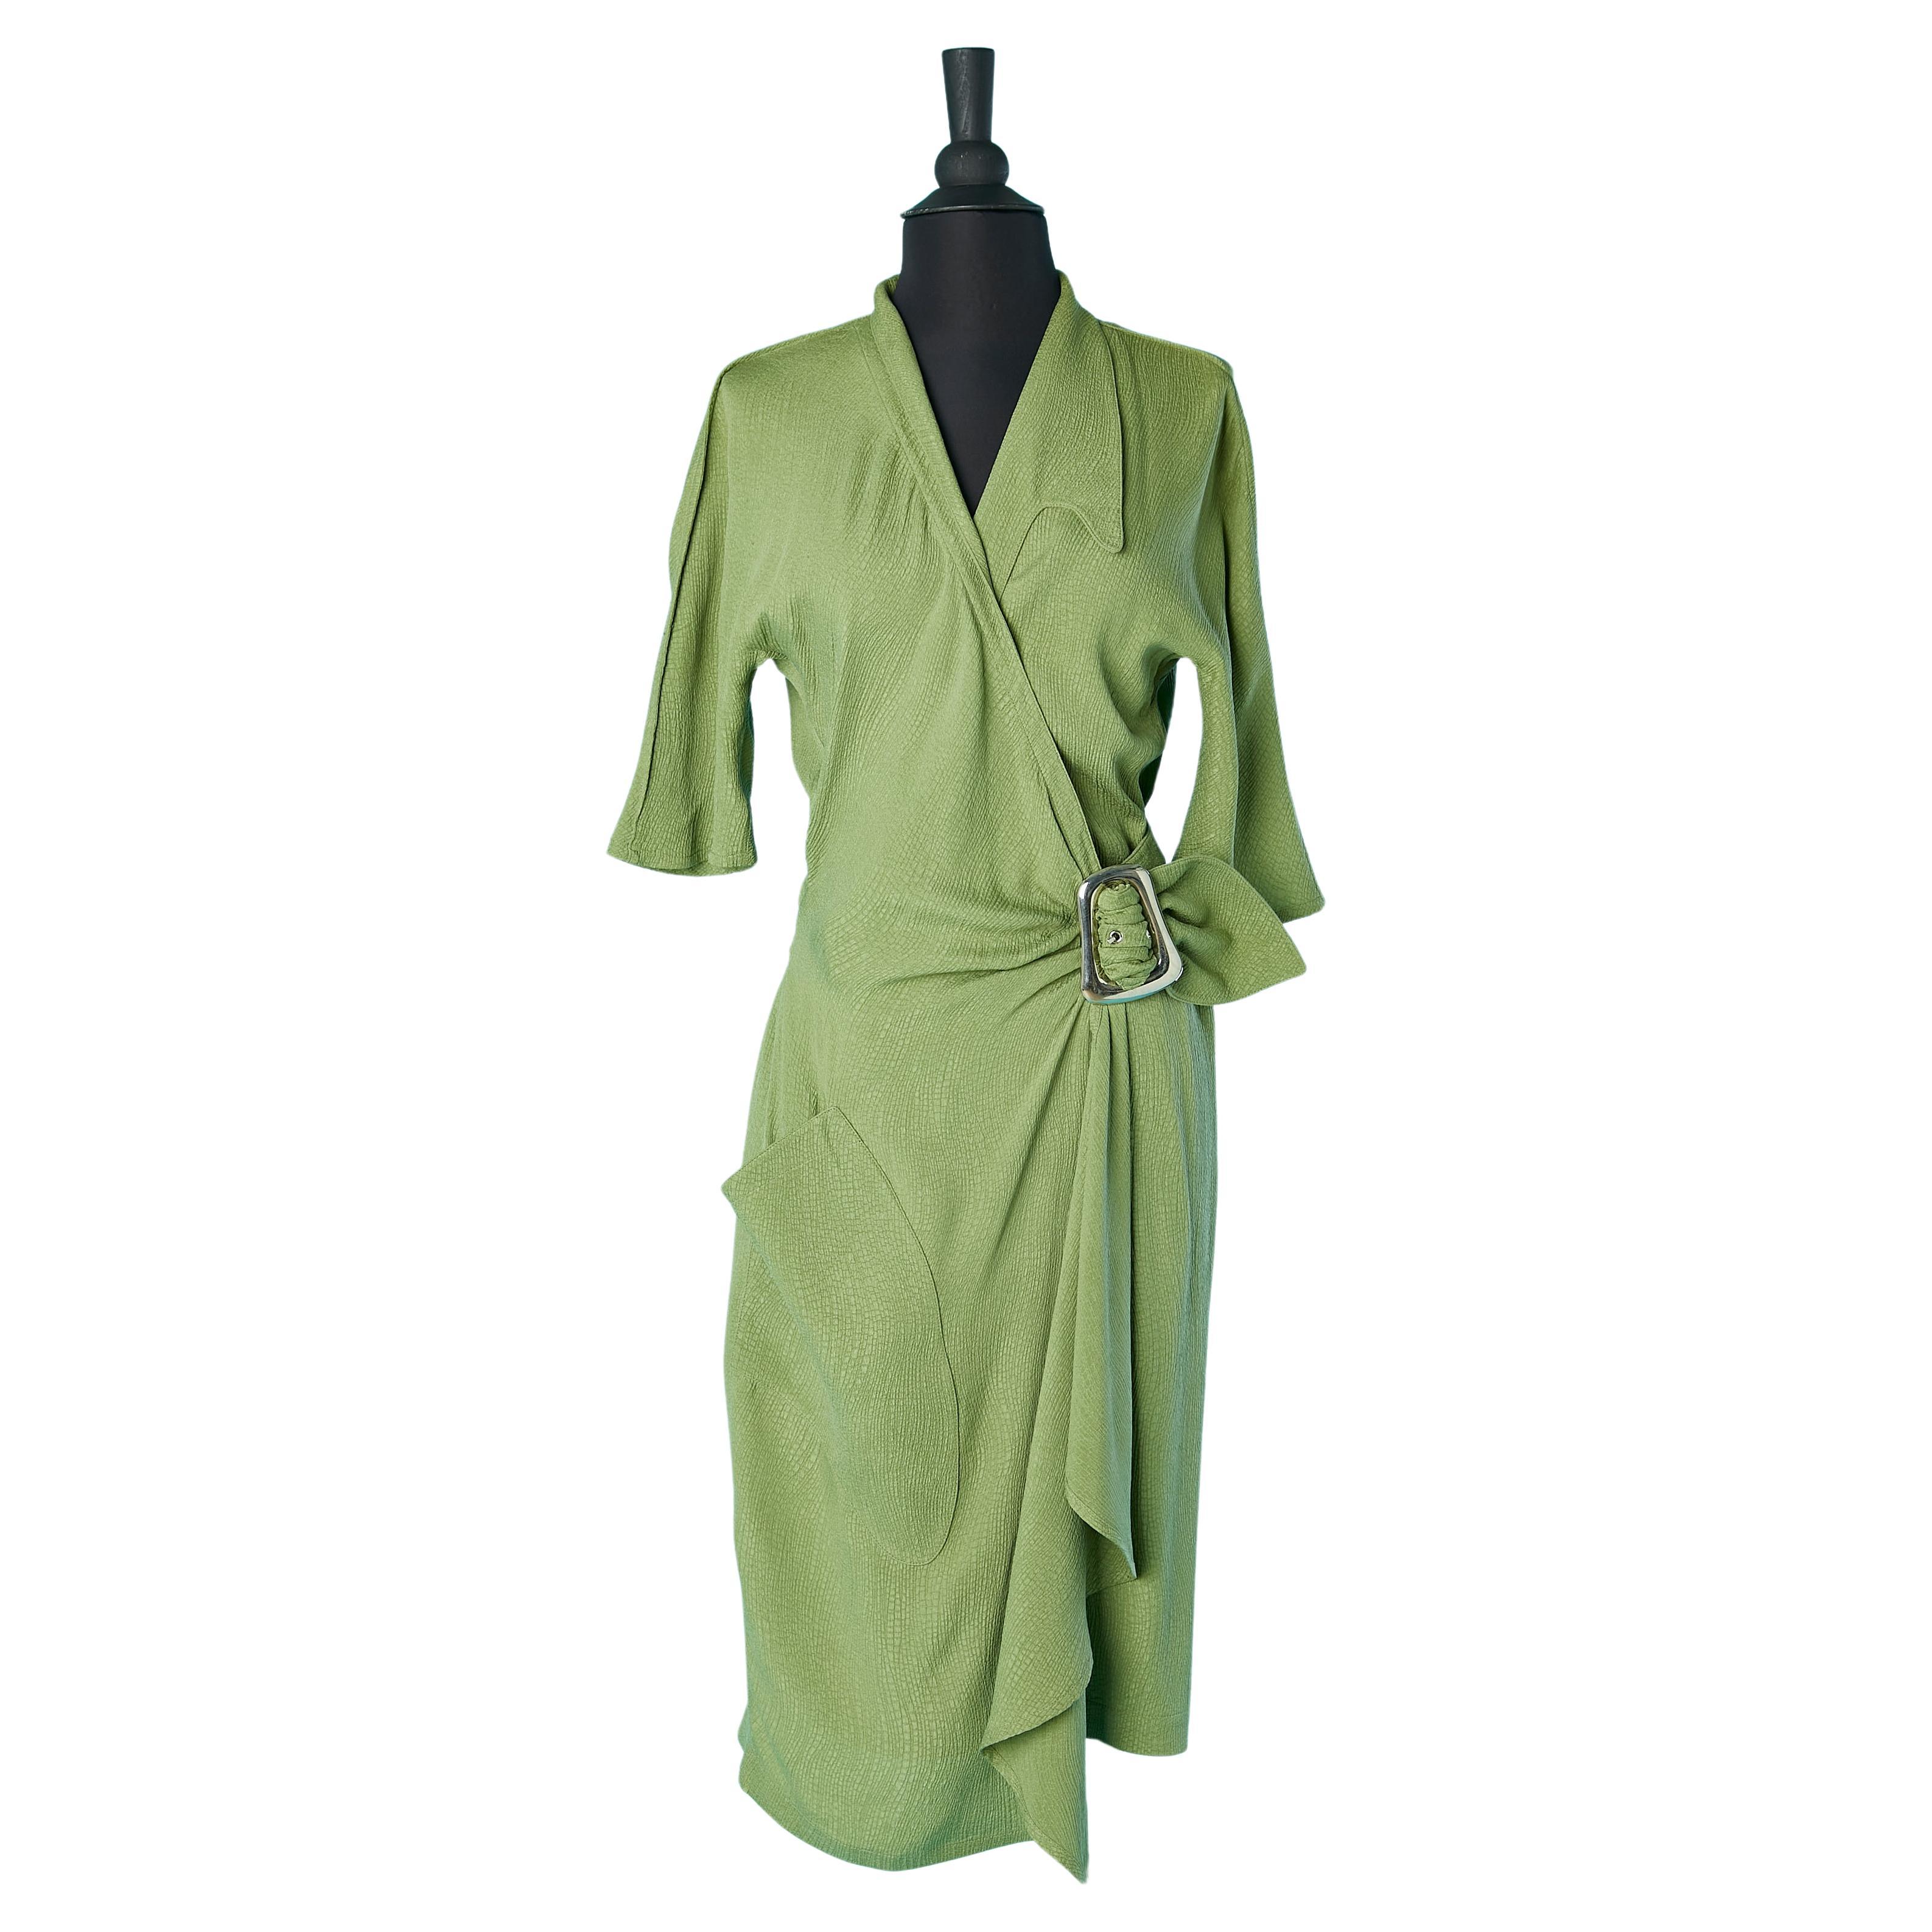 Silk wrap dress with belt and metal buckle Thierry Mugler 